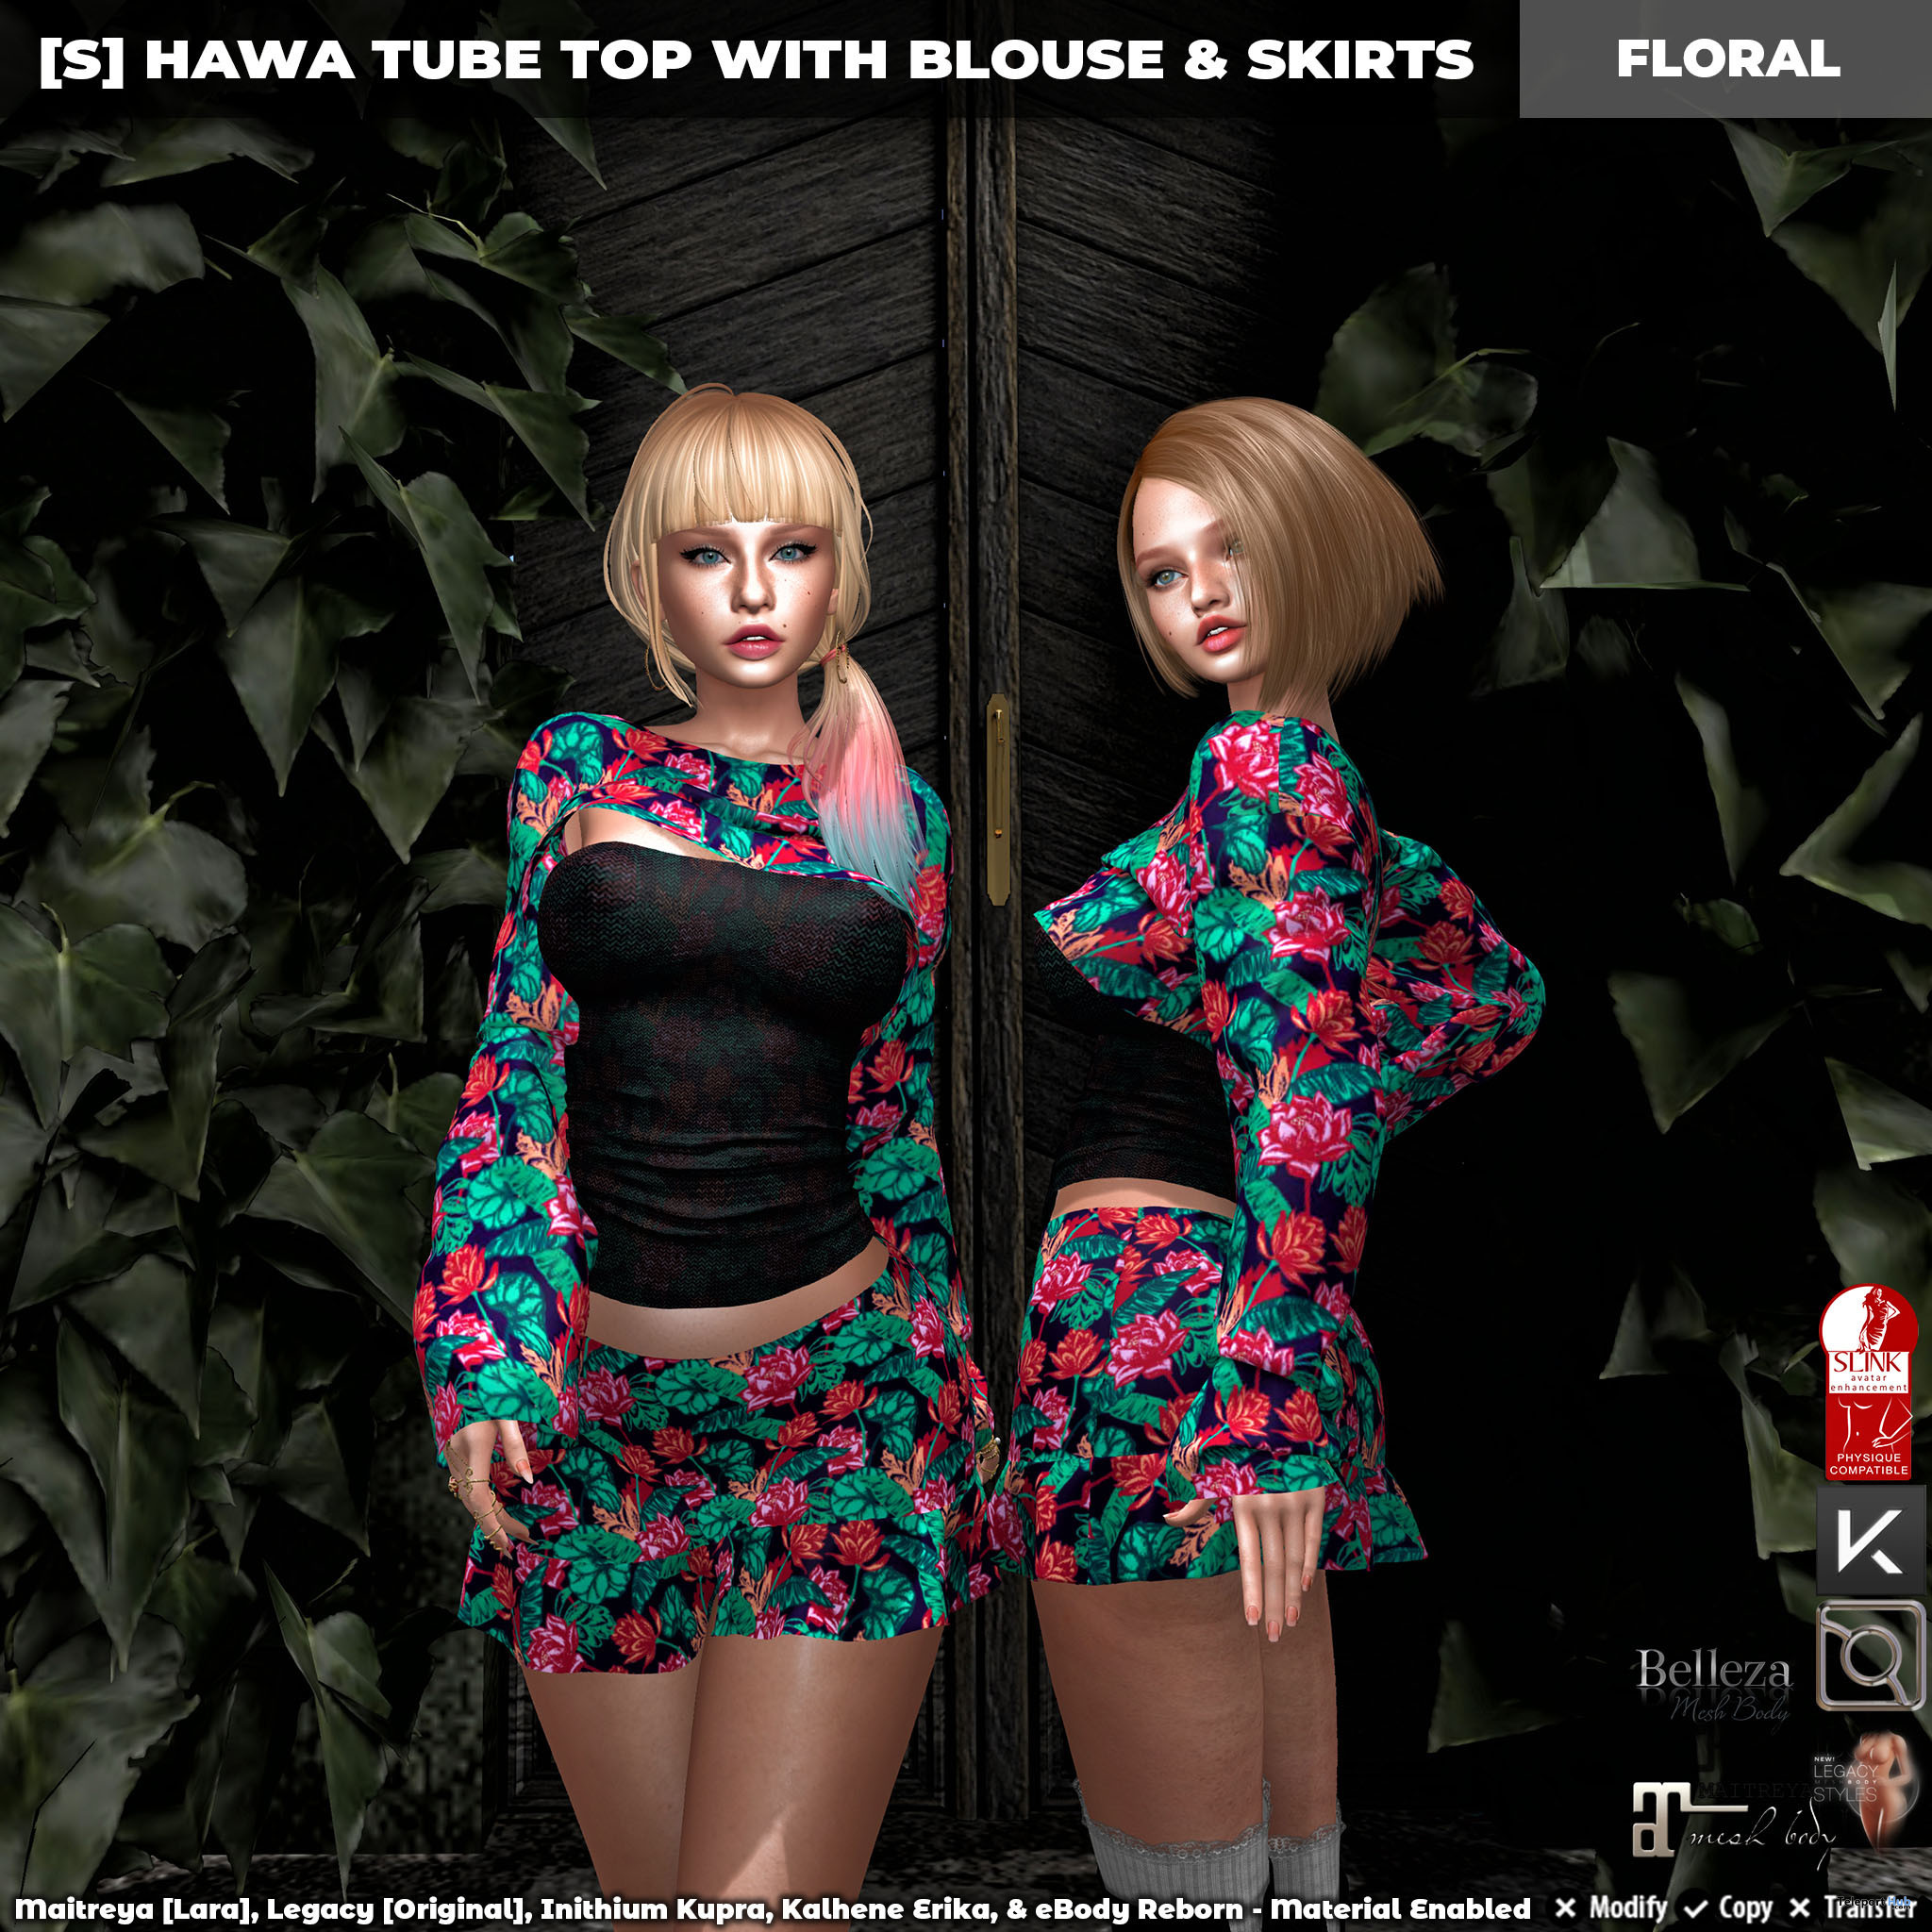 New Release: [S] Hawa Tube Top With Blouse & Skirts by [satus Inc] - Teleport Hub - teleporthub.com